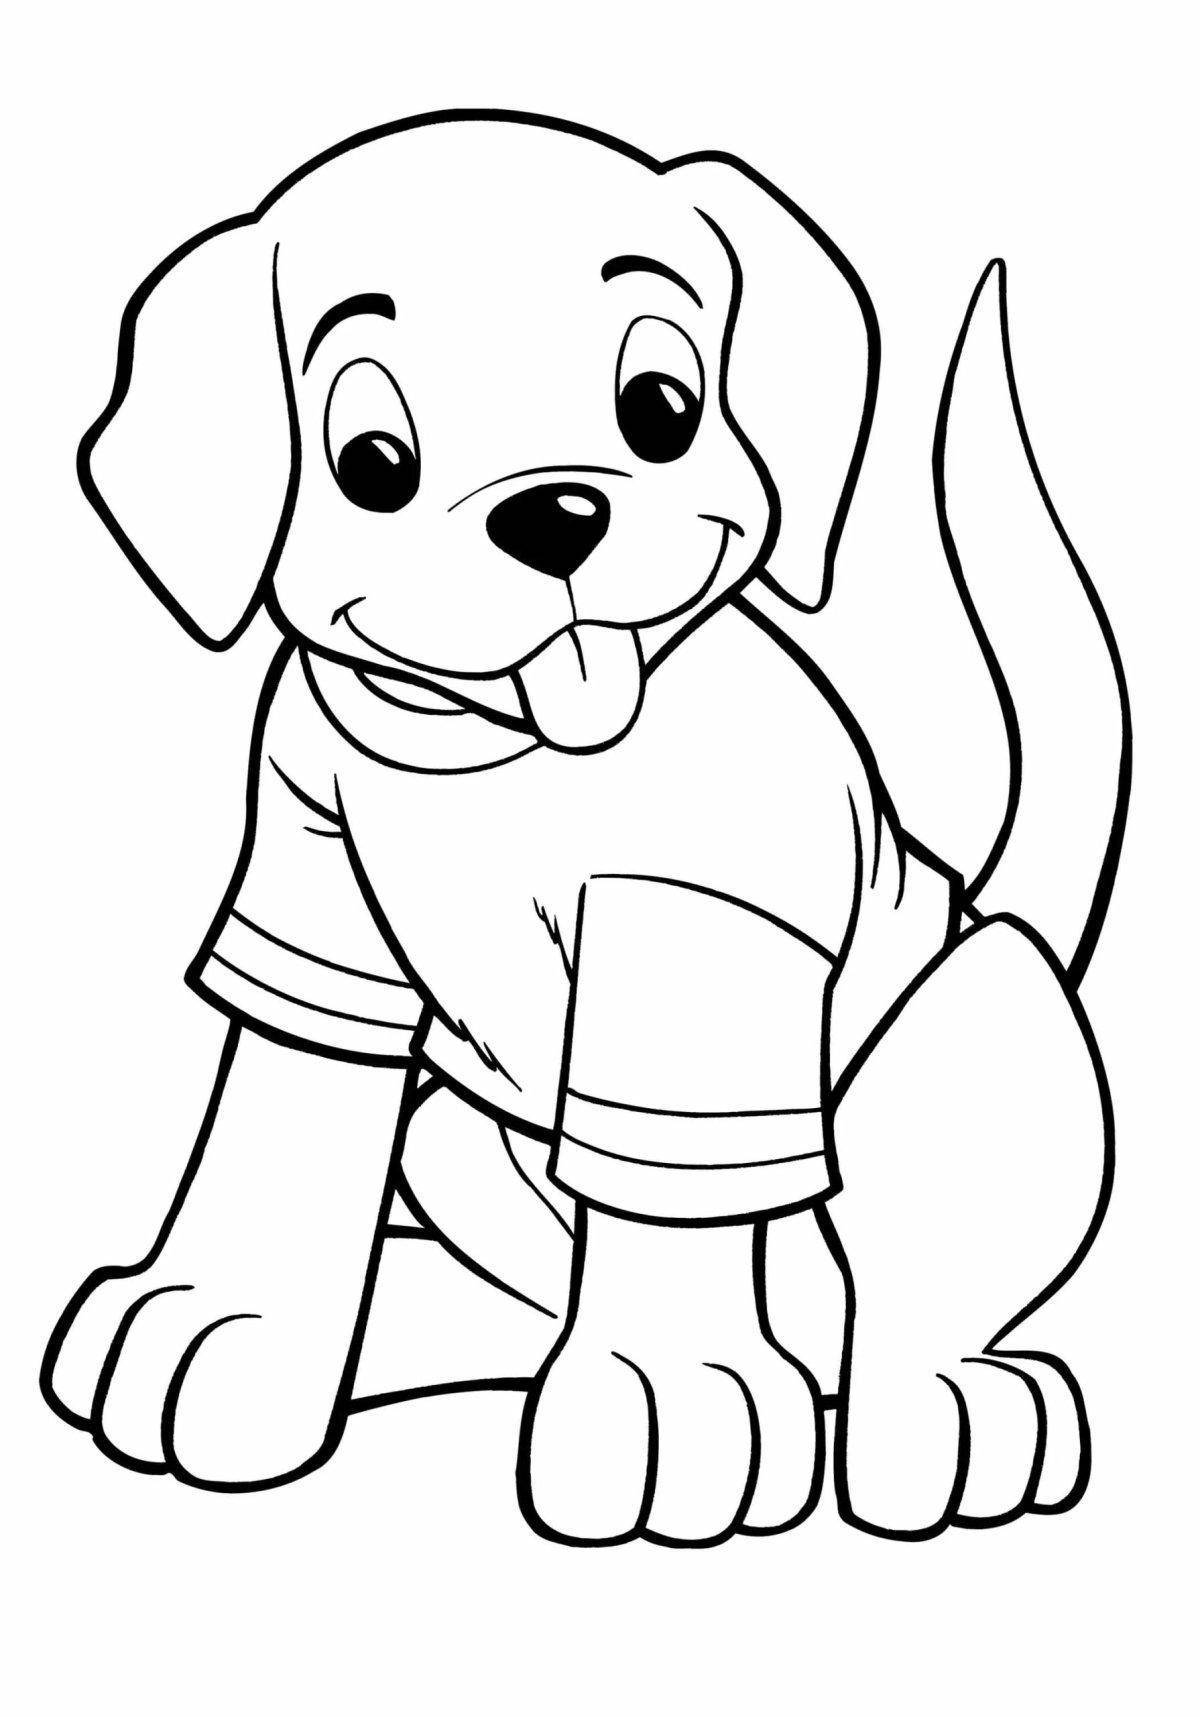 Cute dog coloring book for kids 3-4 years old